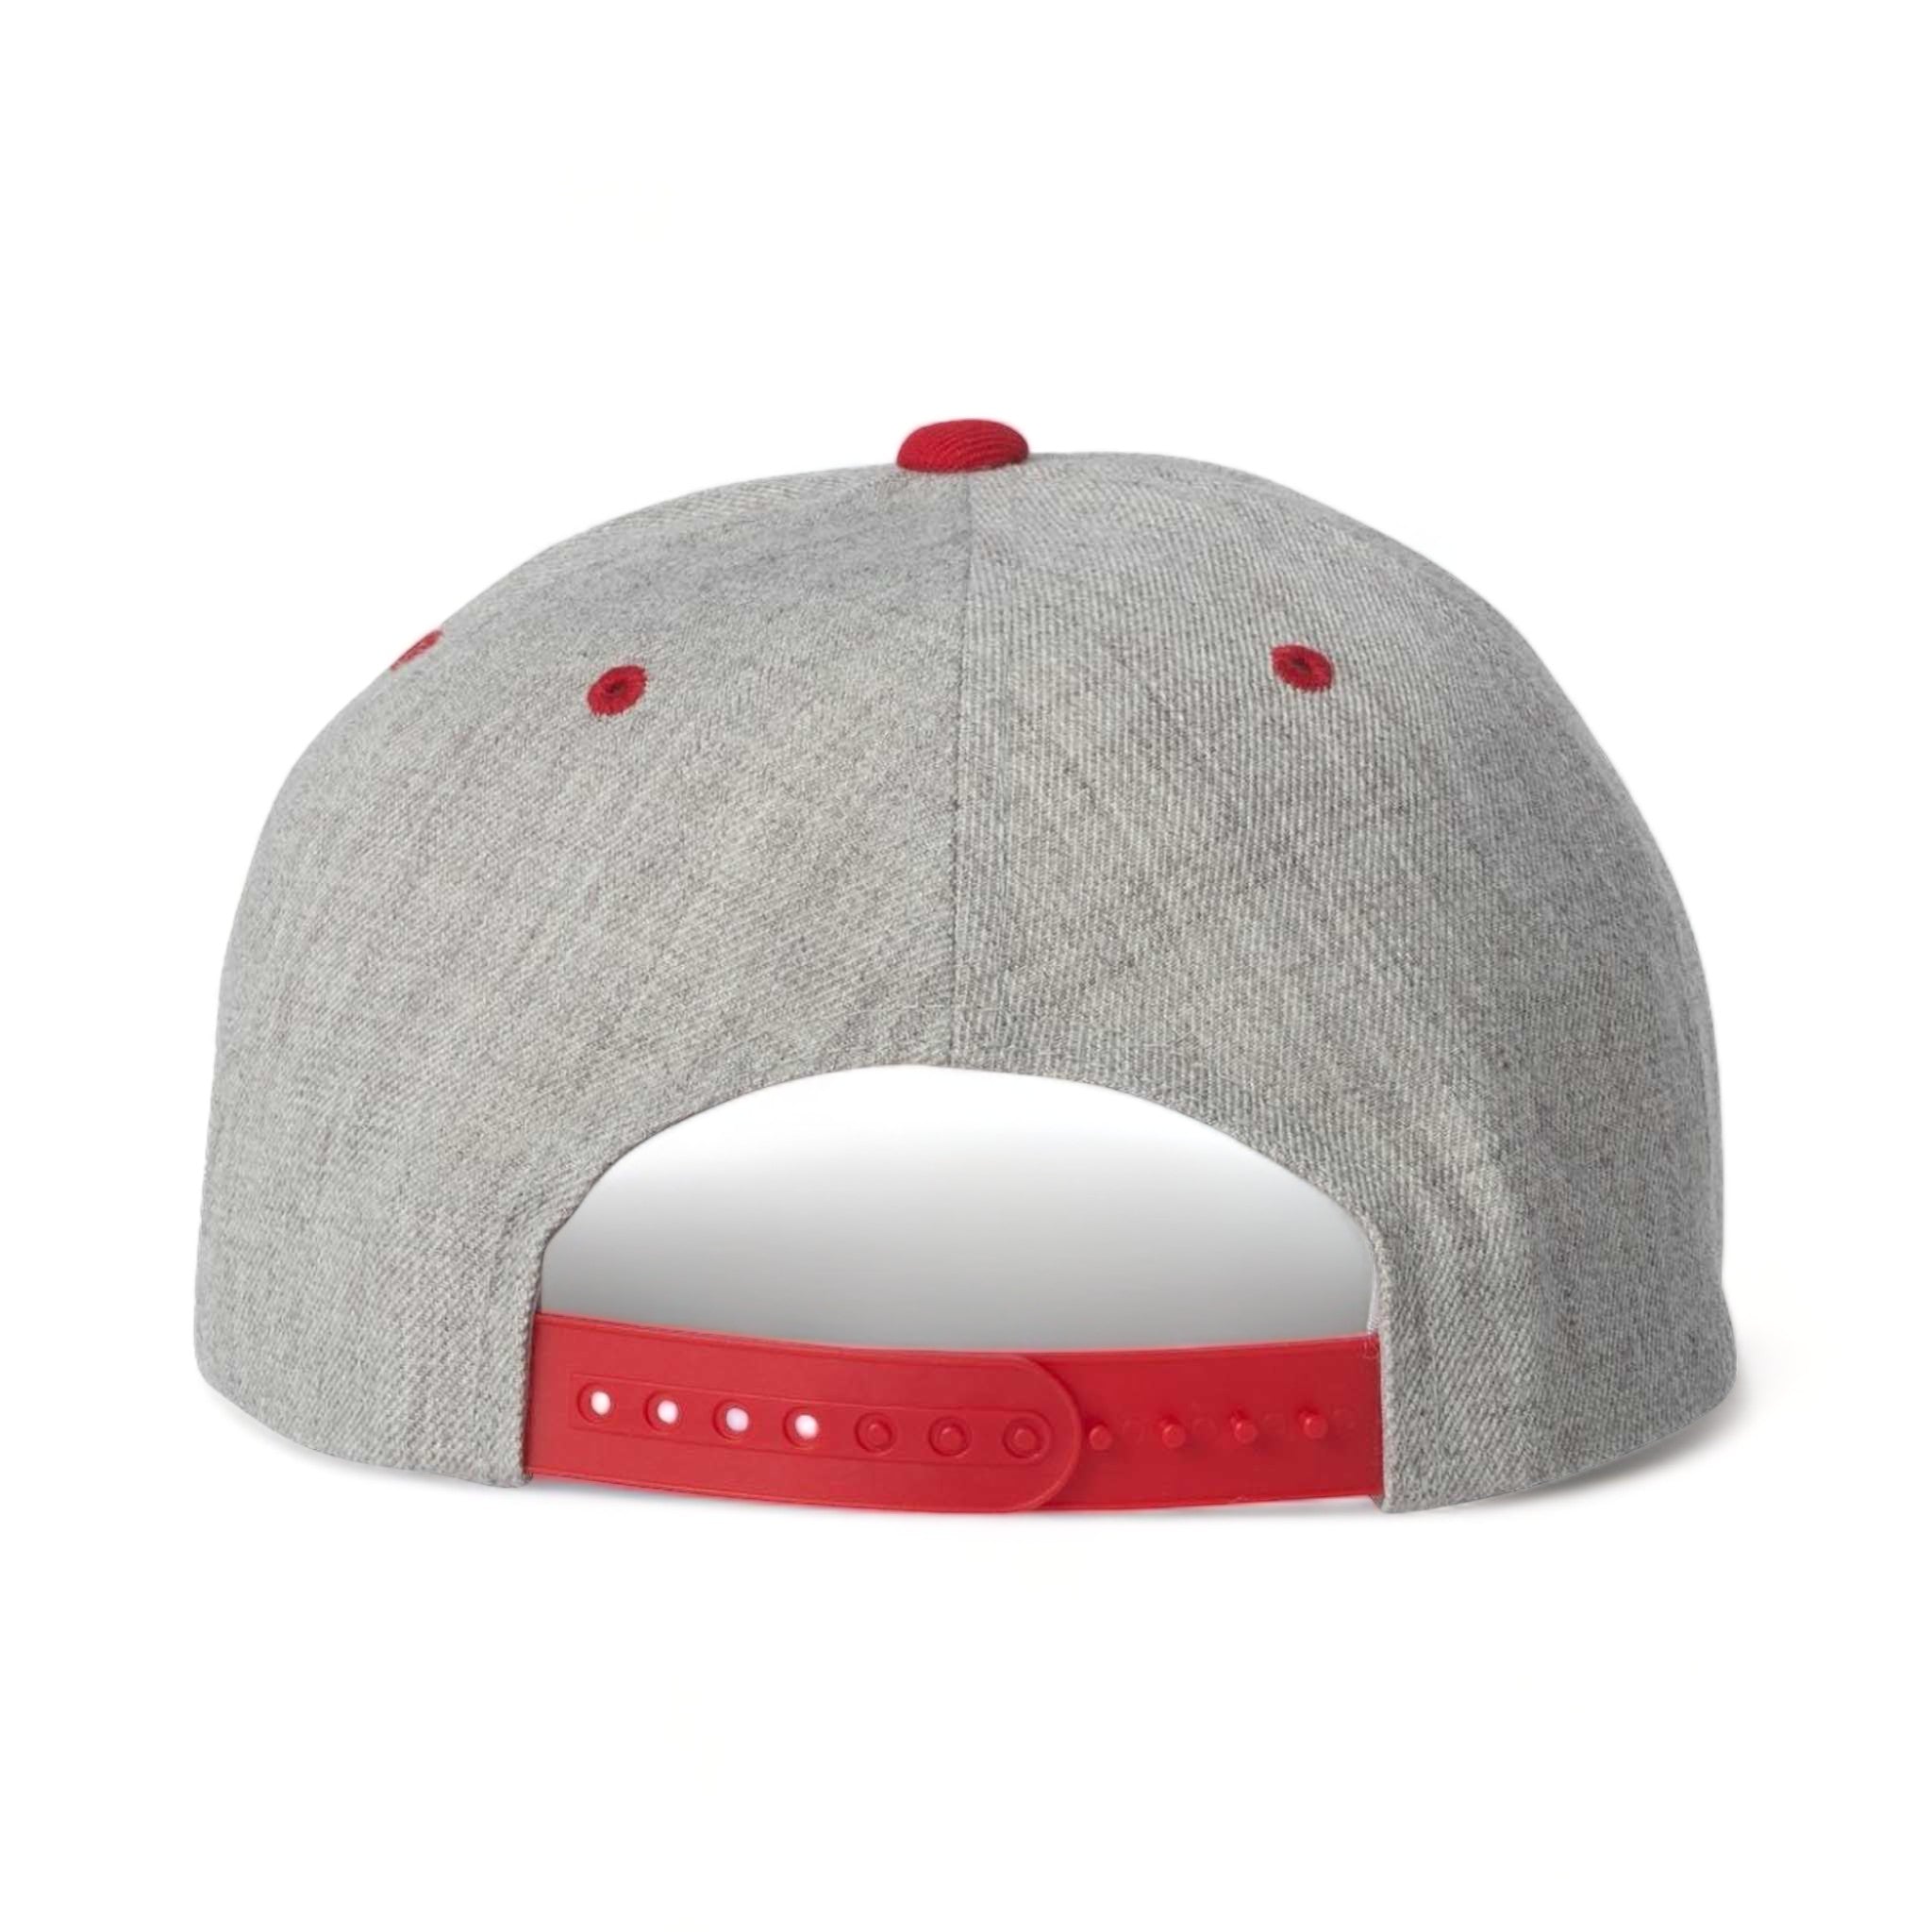 Back view of YP Classics 6089M custom hat in heather grey and red